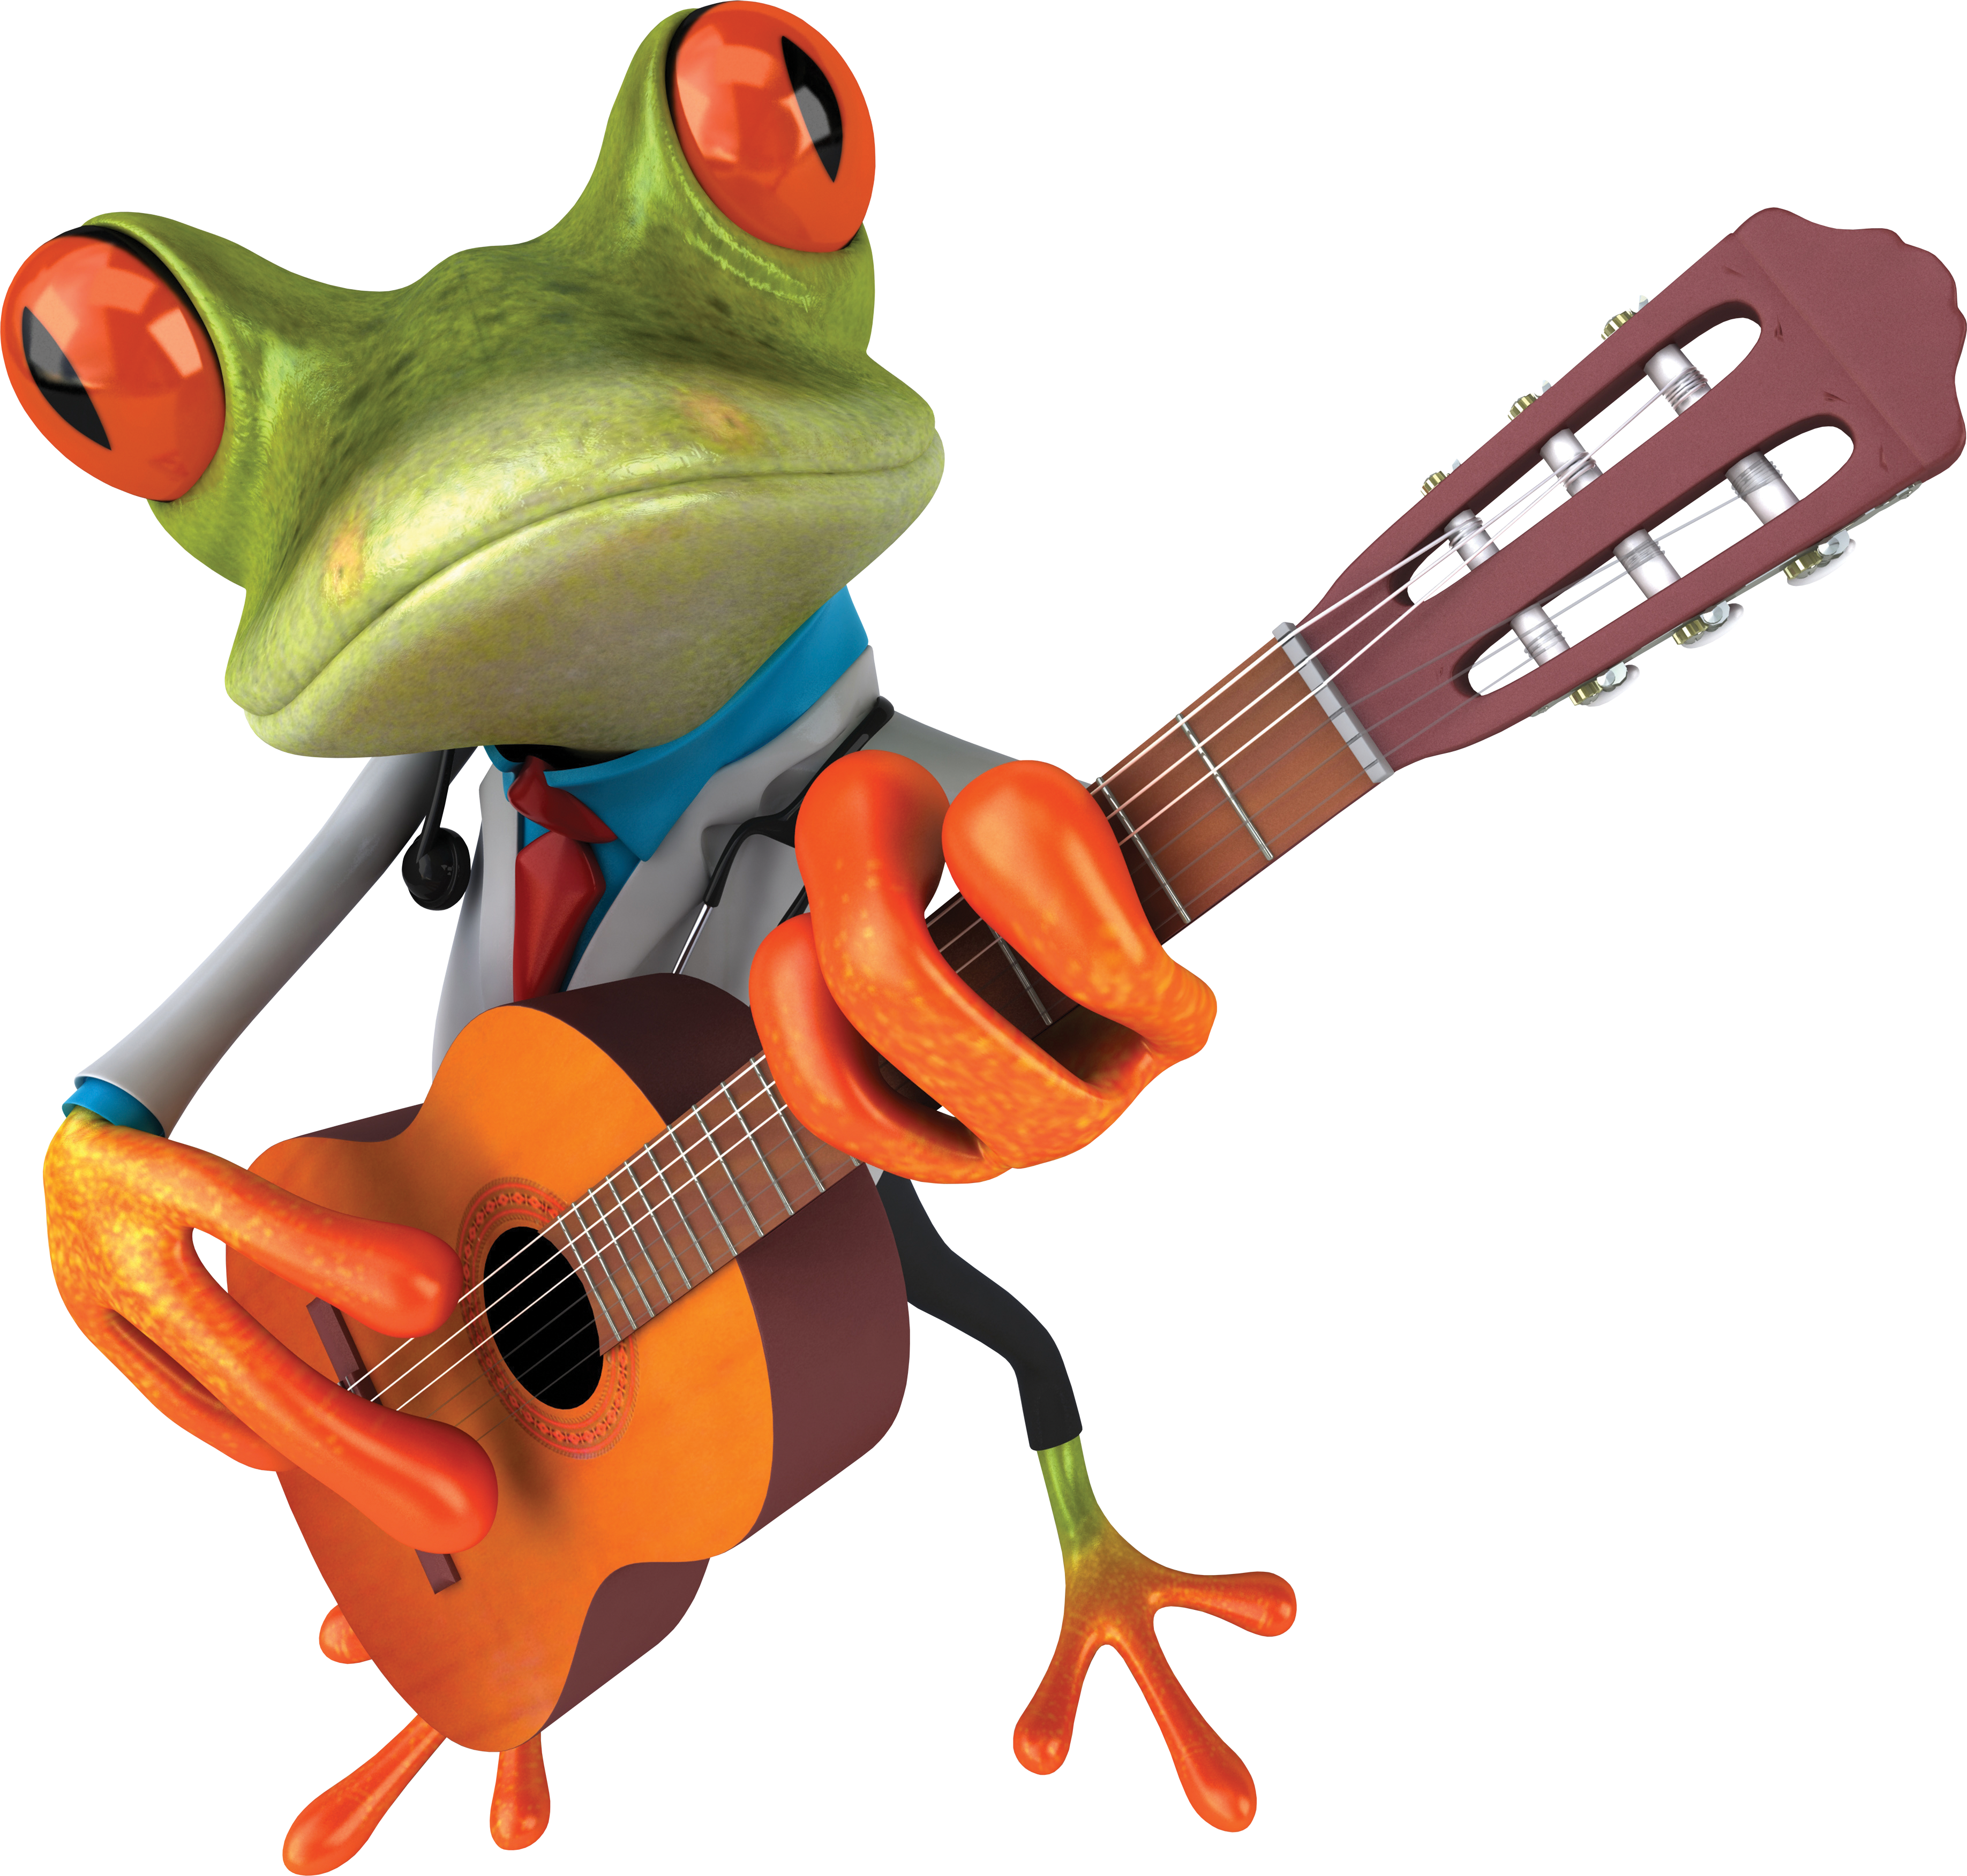 clipart frog musical